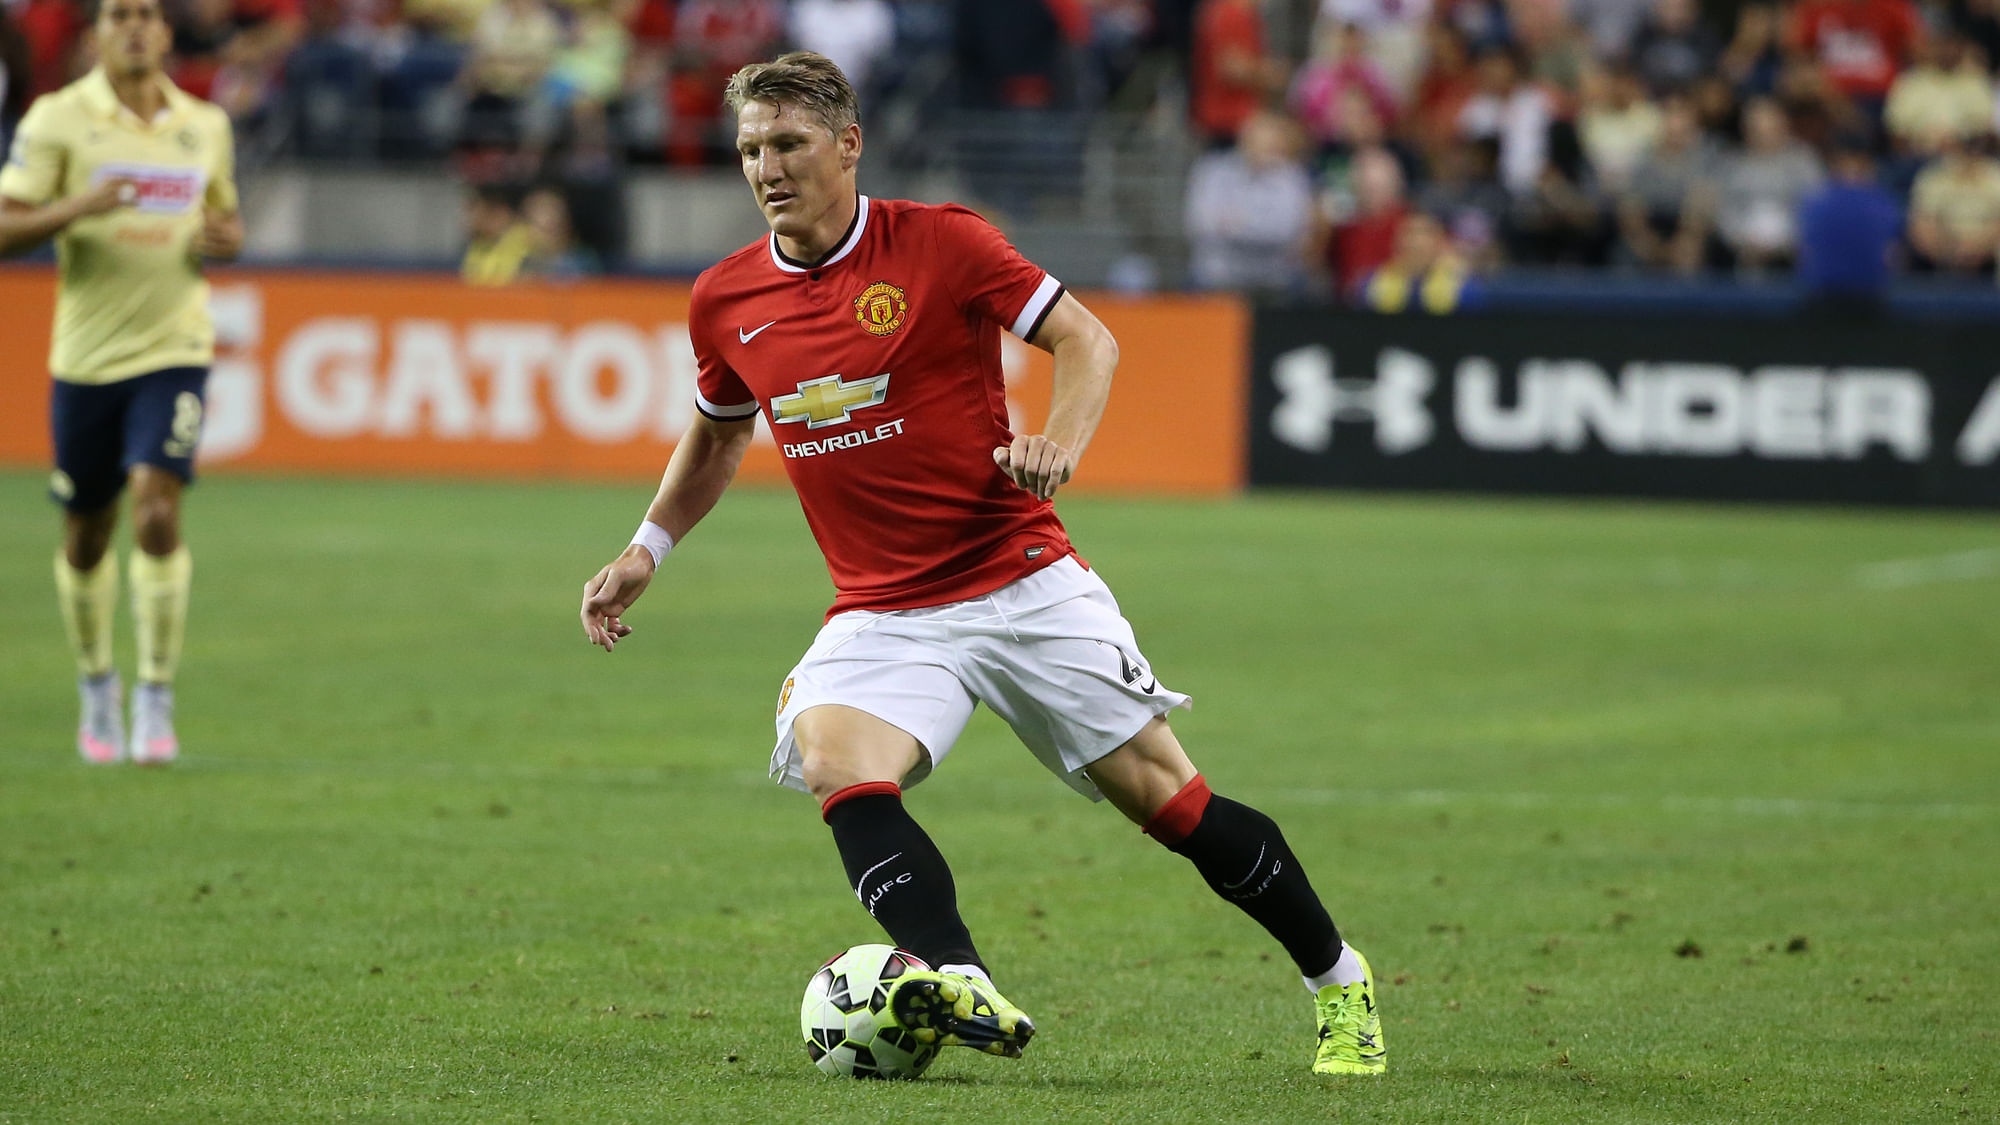 Bastian Schweinsteiger playing for Manchester United in an exhibition match. (Photo: AP)